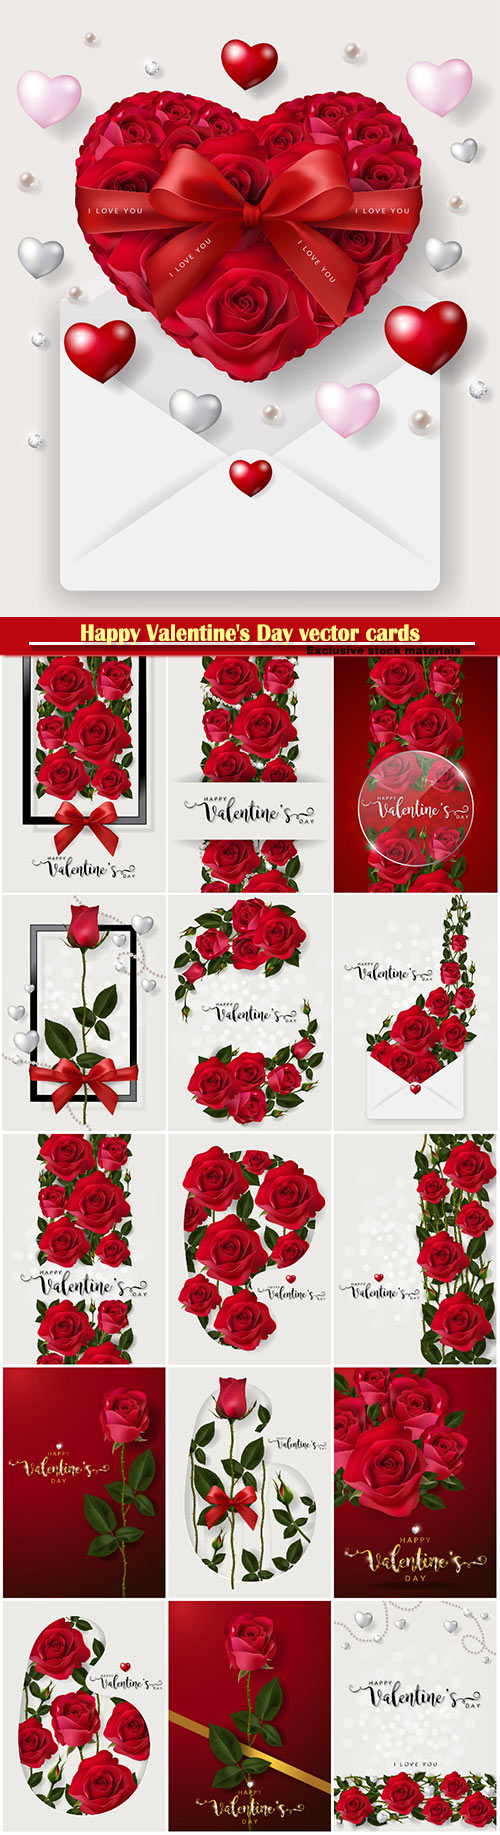 Happy Valentine's Day vector cards, red roses and hearts, romantic backgrounds # 3